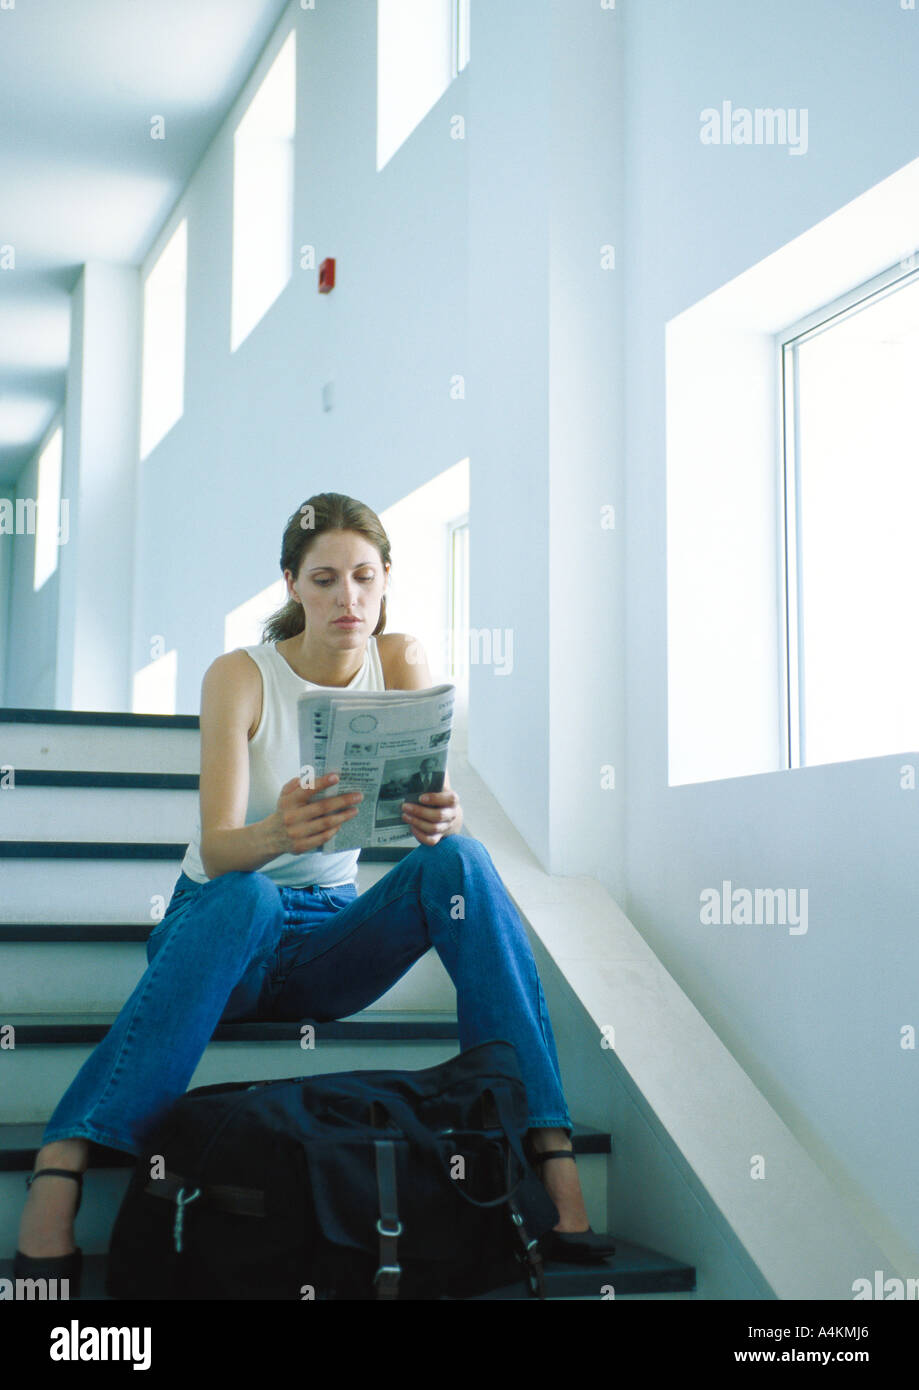 Woman sitting on stairs, reading newspaper, full length Stock Photo